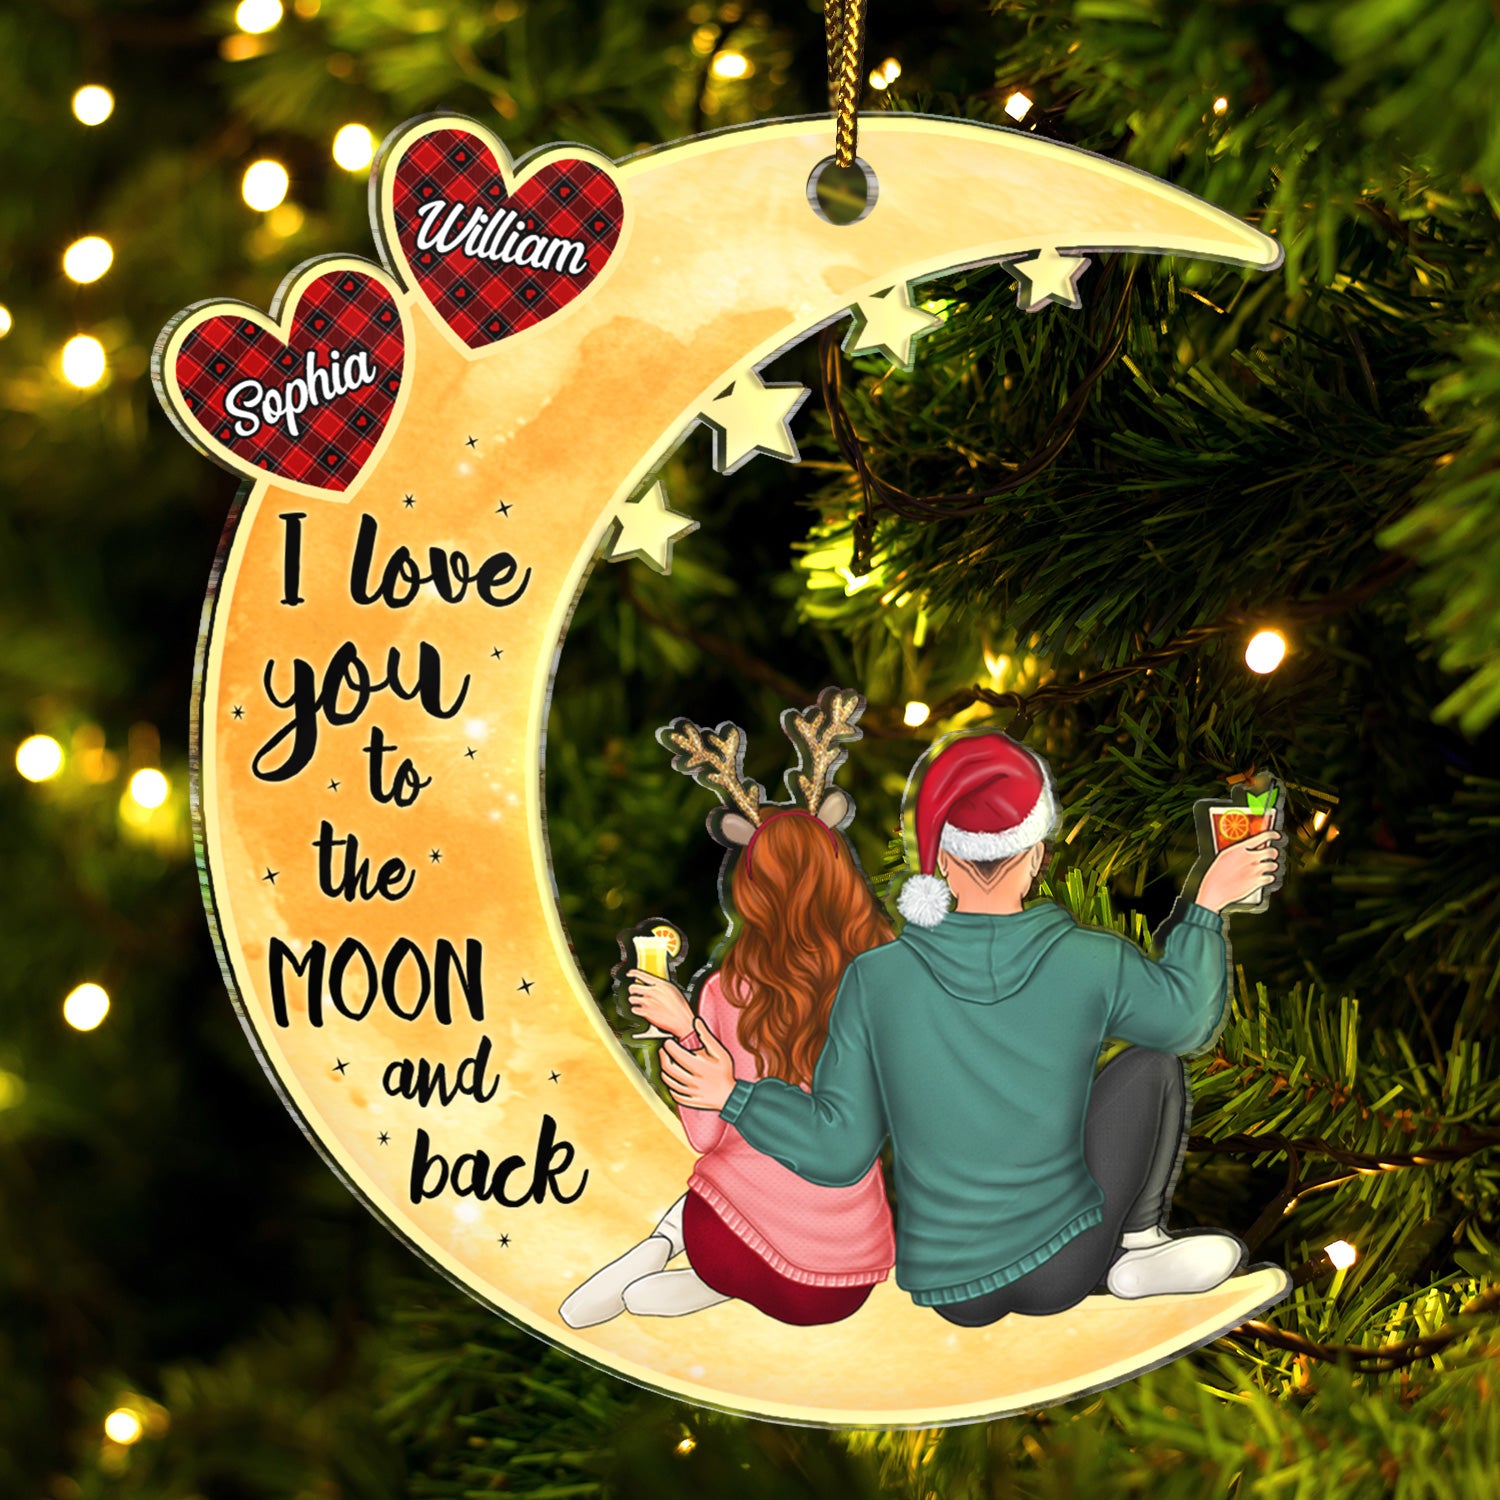 Love You To The Moon And Back - Anniversary, Christmas Gift For Couples, Husband, Wife - Personalized Cutout Acrylic Ornament